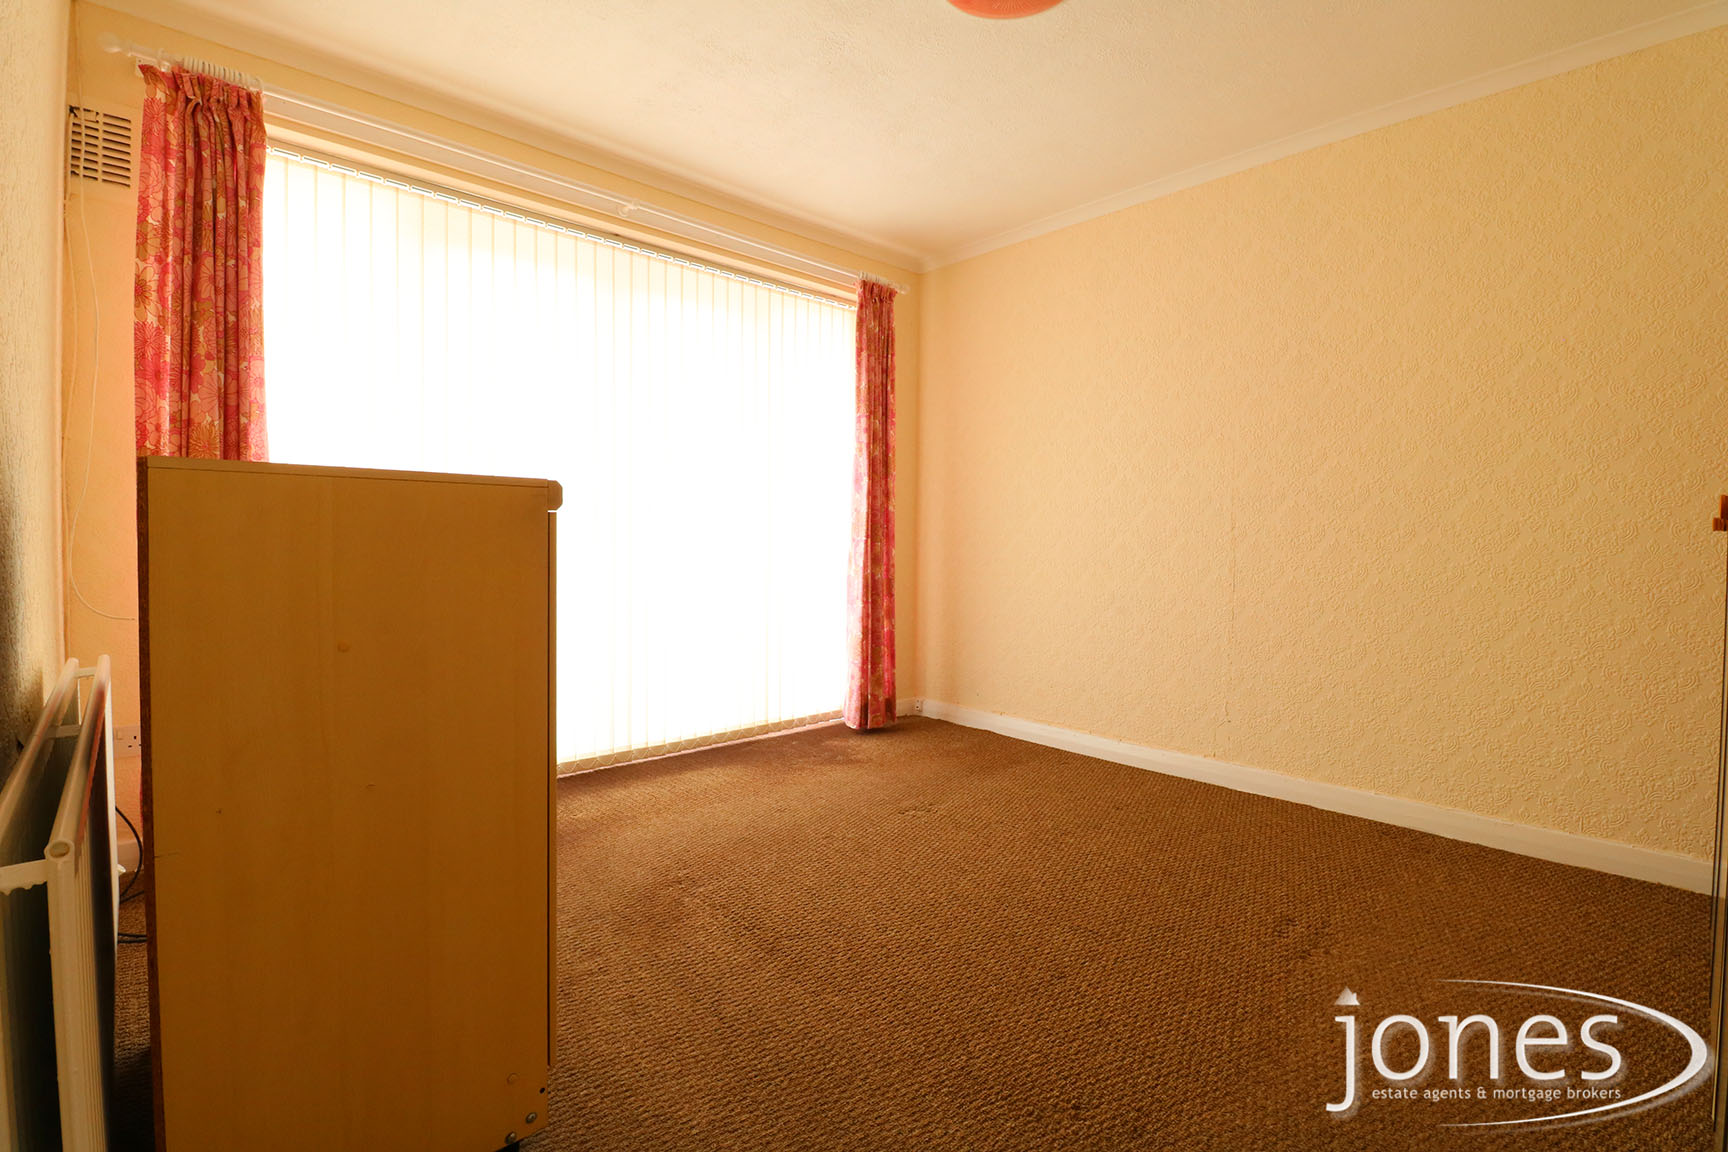 Home for Sale Let - Photo 04 Sycamore Road, Stockton on Tees, TS19 0NB